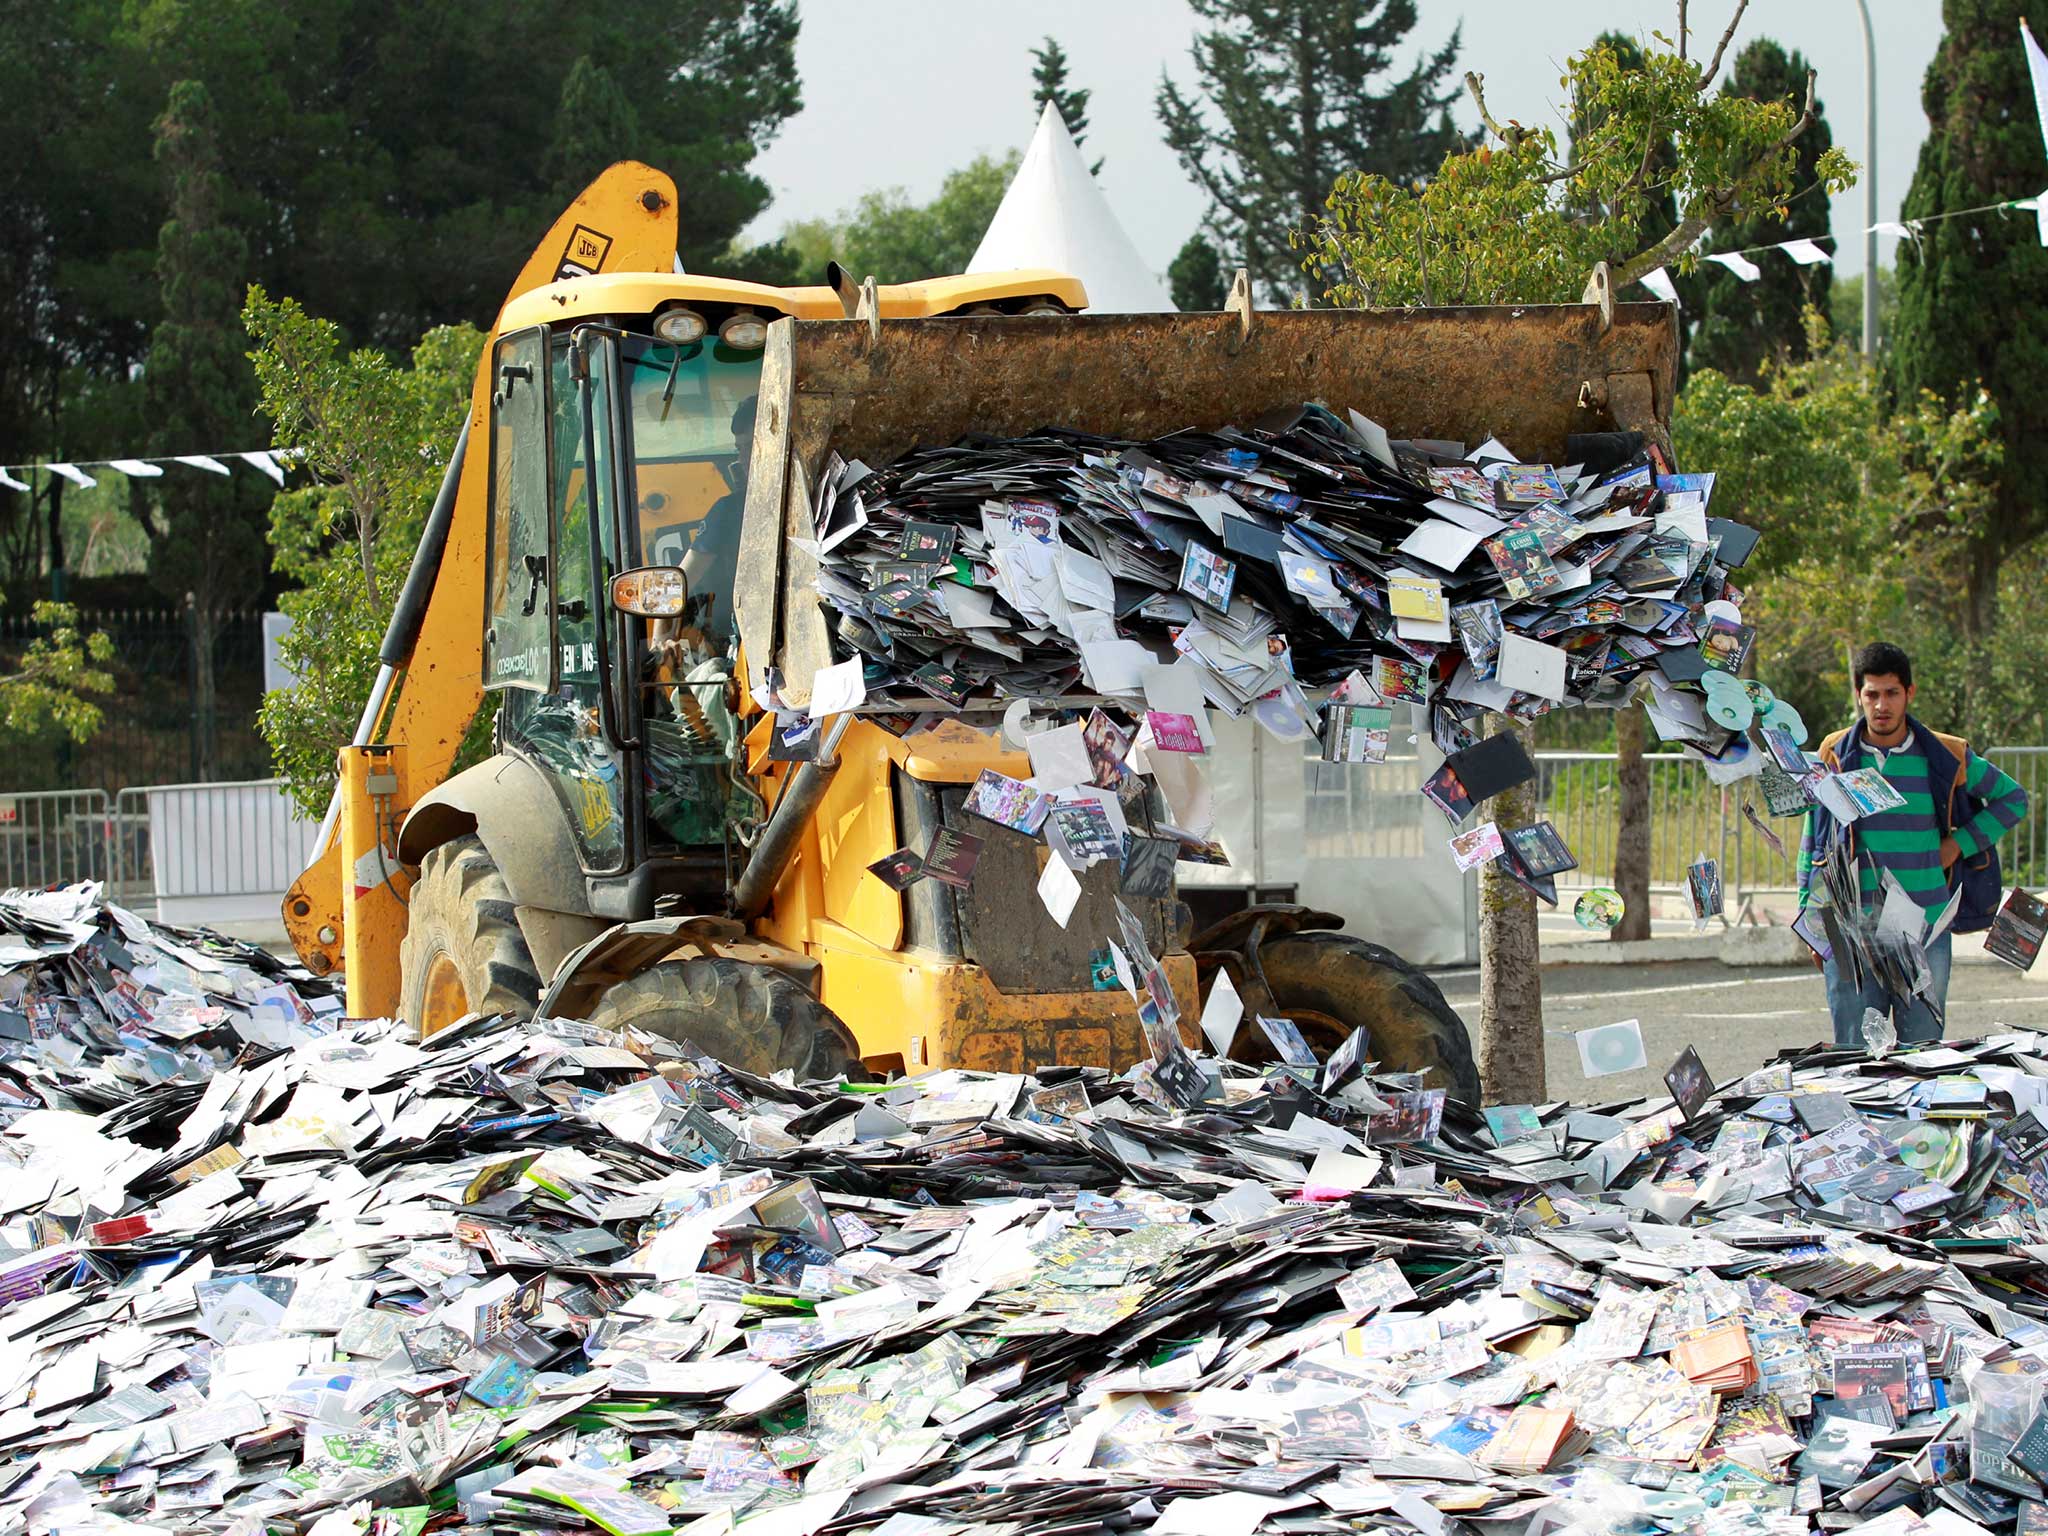 A crane destroys over one million pirated music, movie and software CDs and DVDs in a campaign against piracy organised by the government in Algiers, Algeria